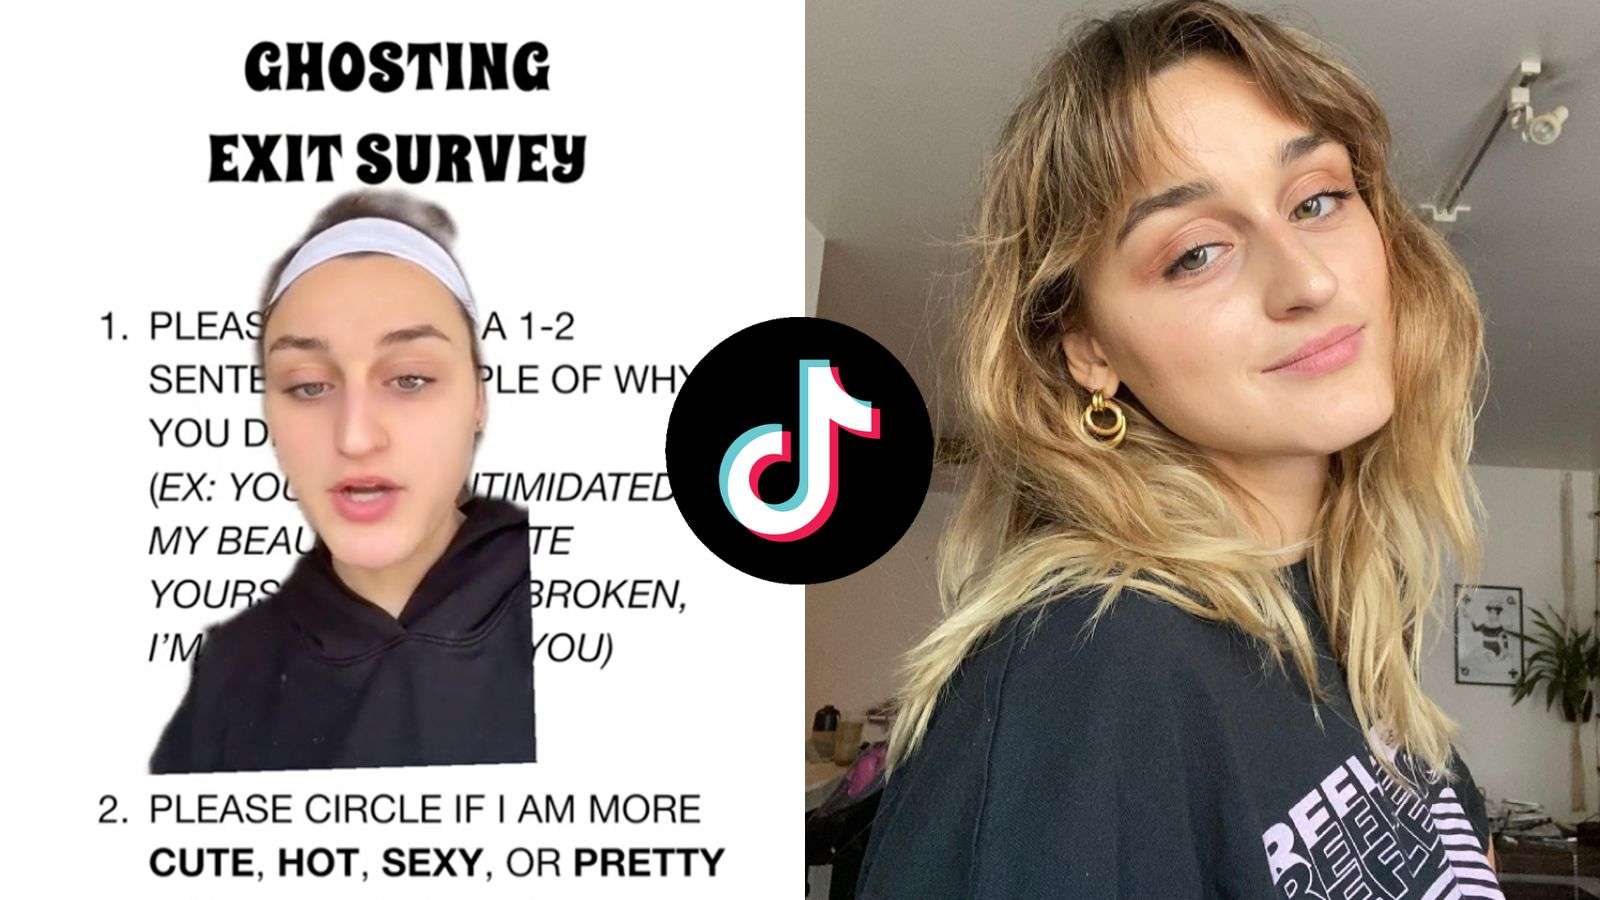 Woman creates 'exit survey' to find out why guys keep ghosting her